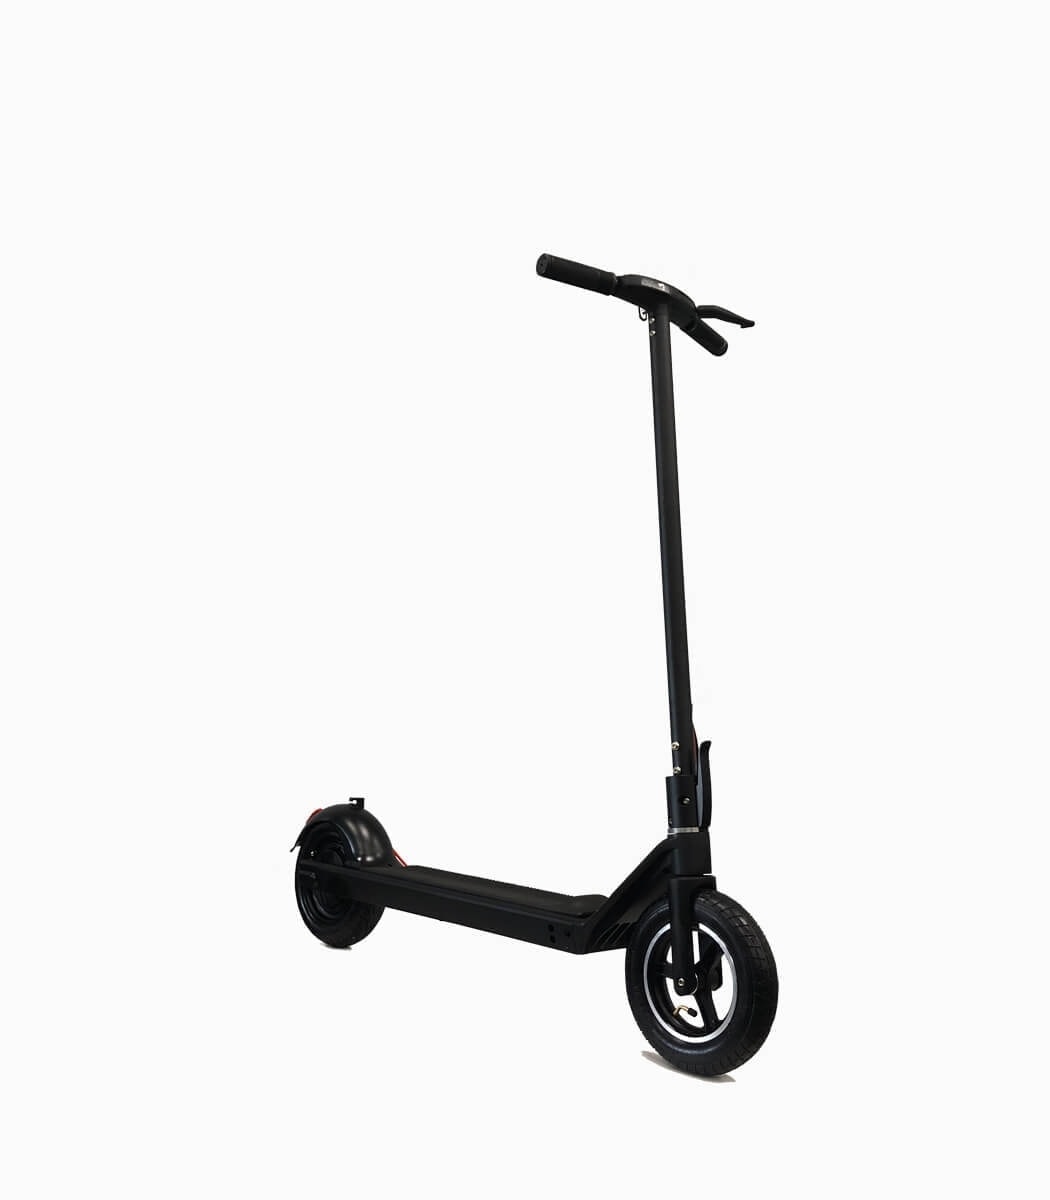 MOBOT F16 (BLACK5.2AH) UL2272 certified e-scooter black angled right